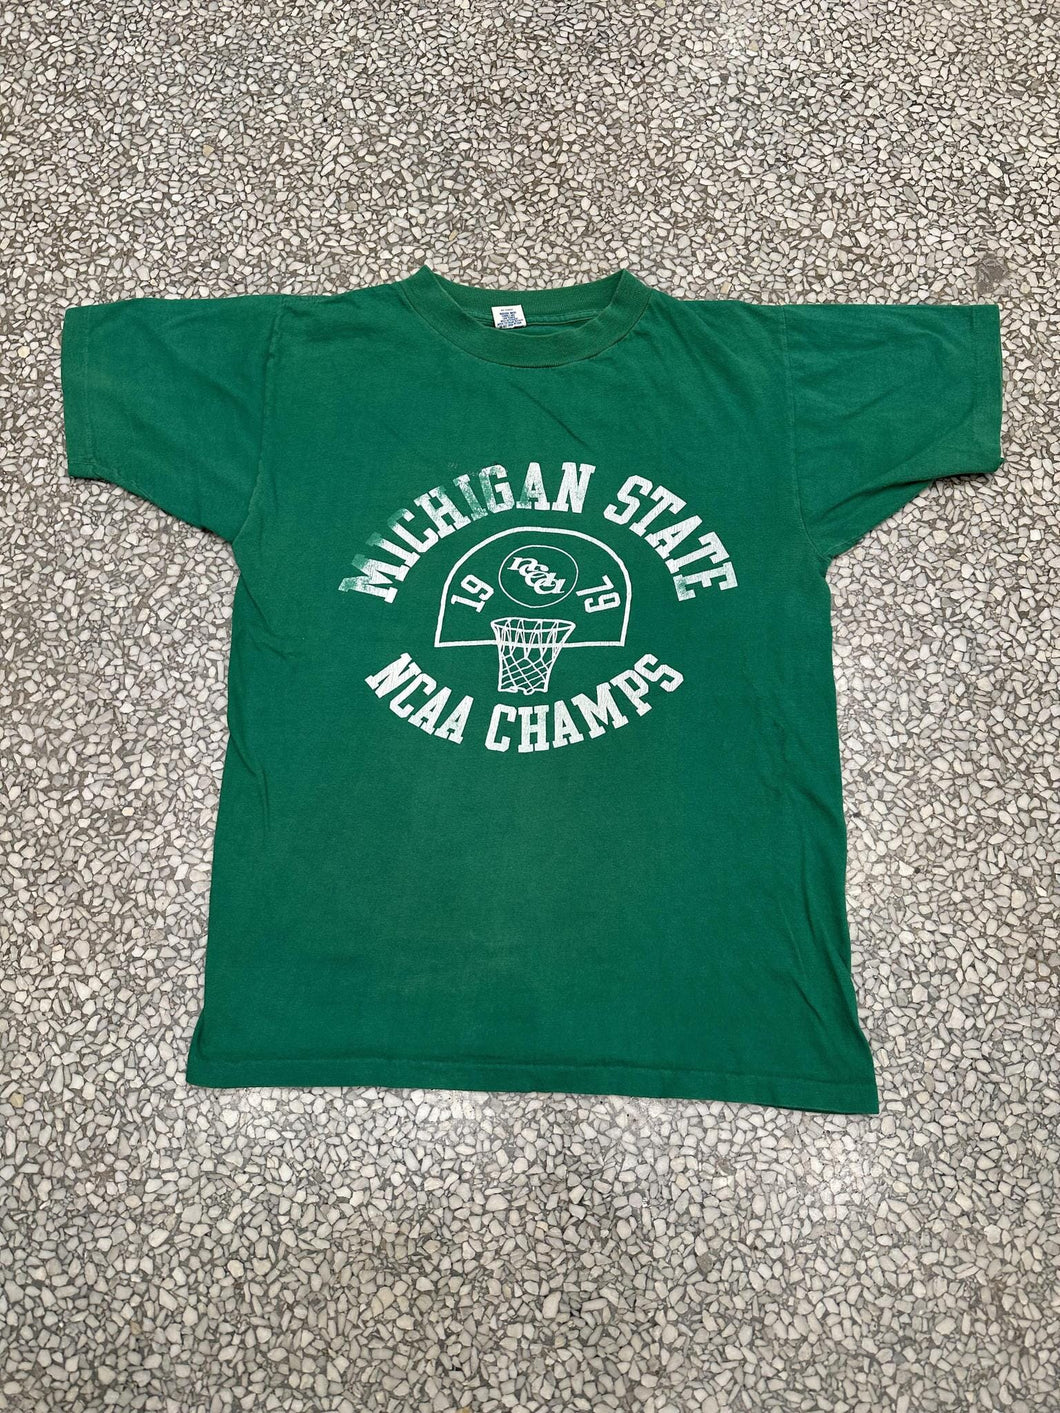 Michigan State Vintage 1979 NCAA Champs Faded Green ABC Vintage 